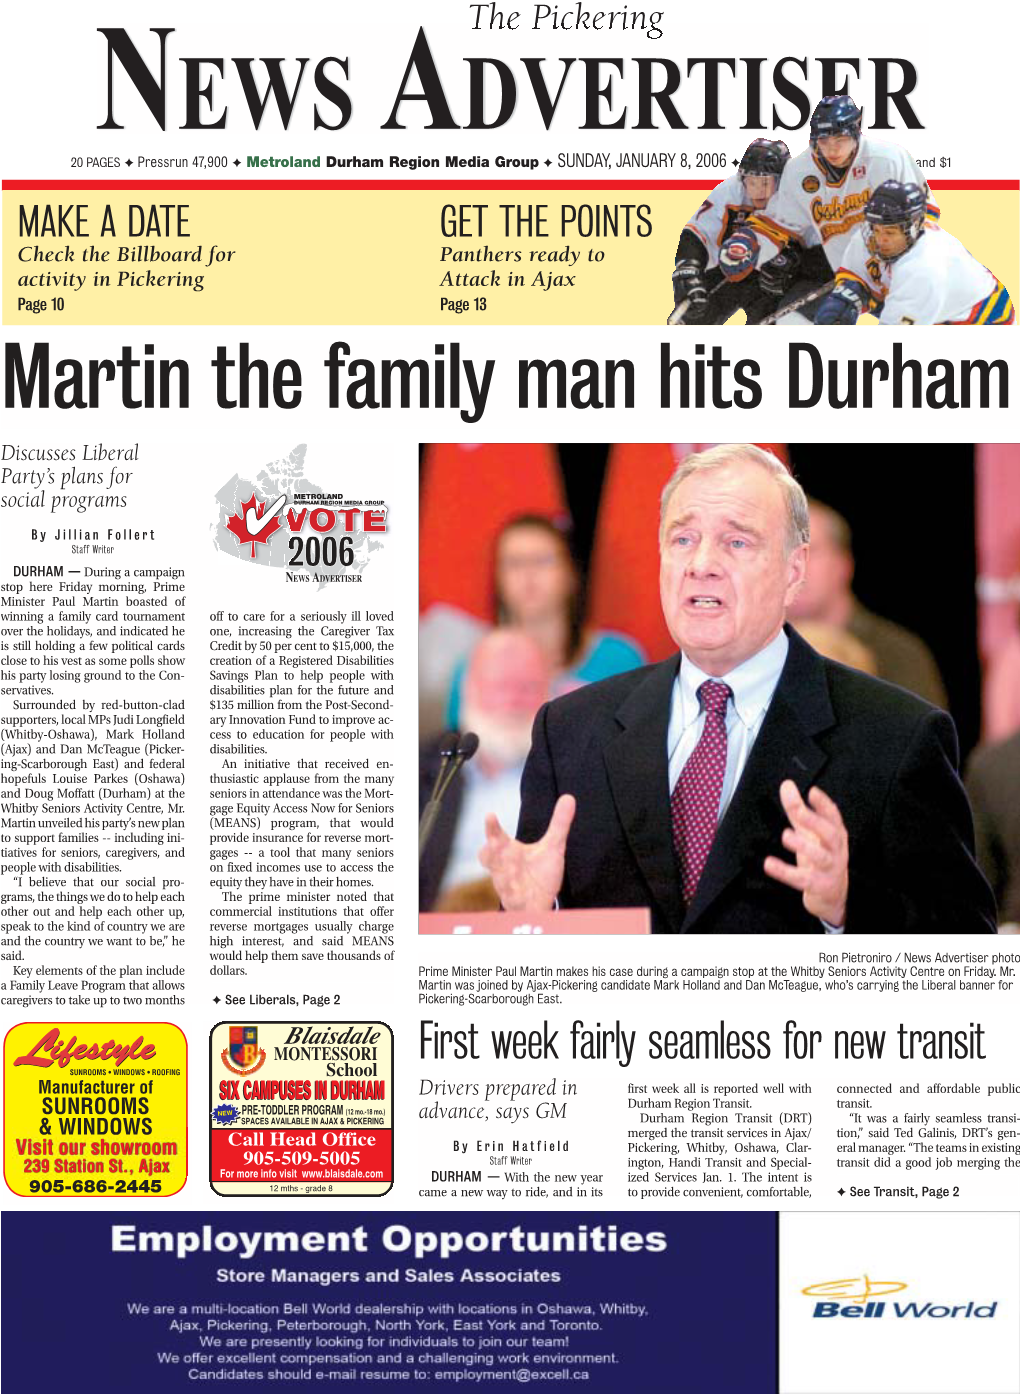 Martin the Family Man Hits Durham Discusses Liberal Party’S Plans for Social Programs